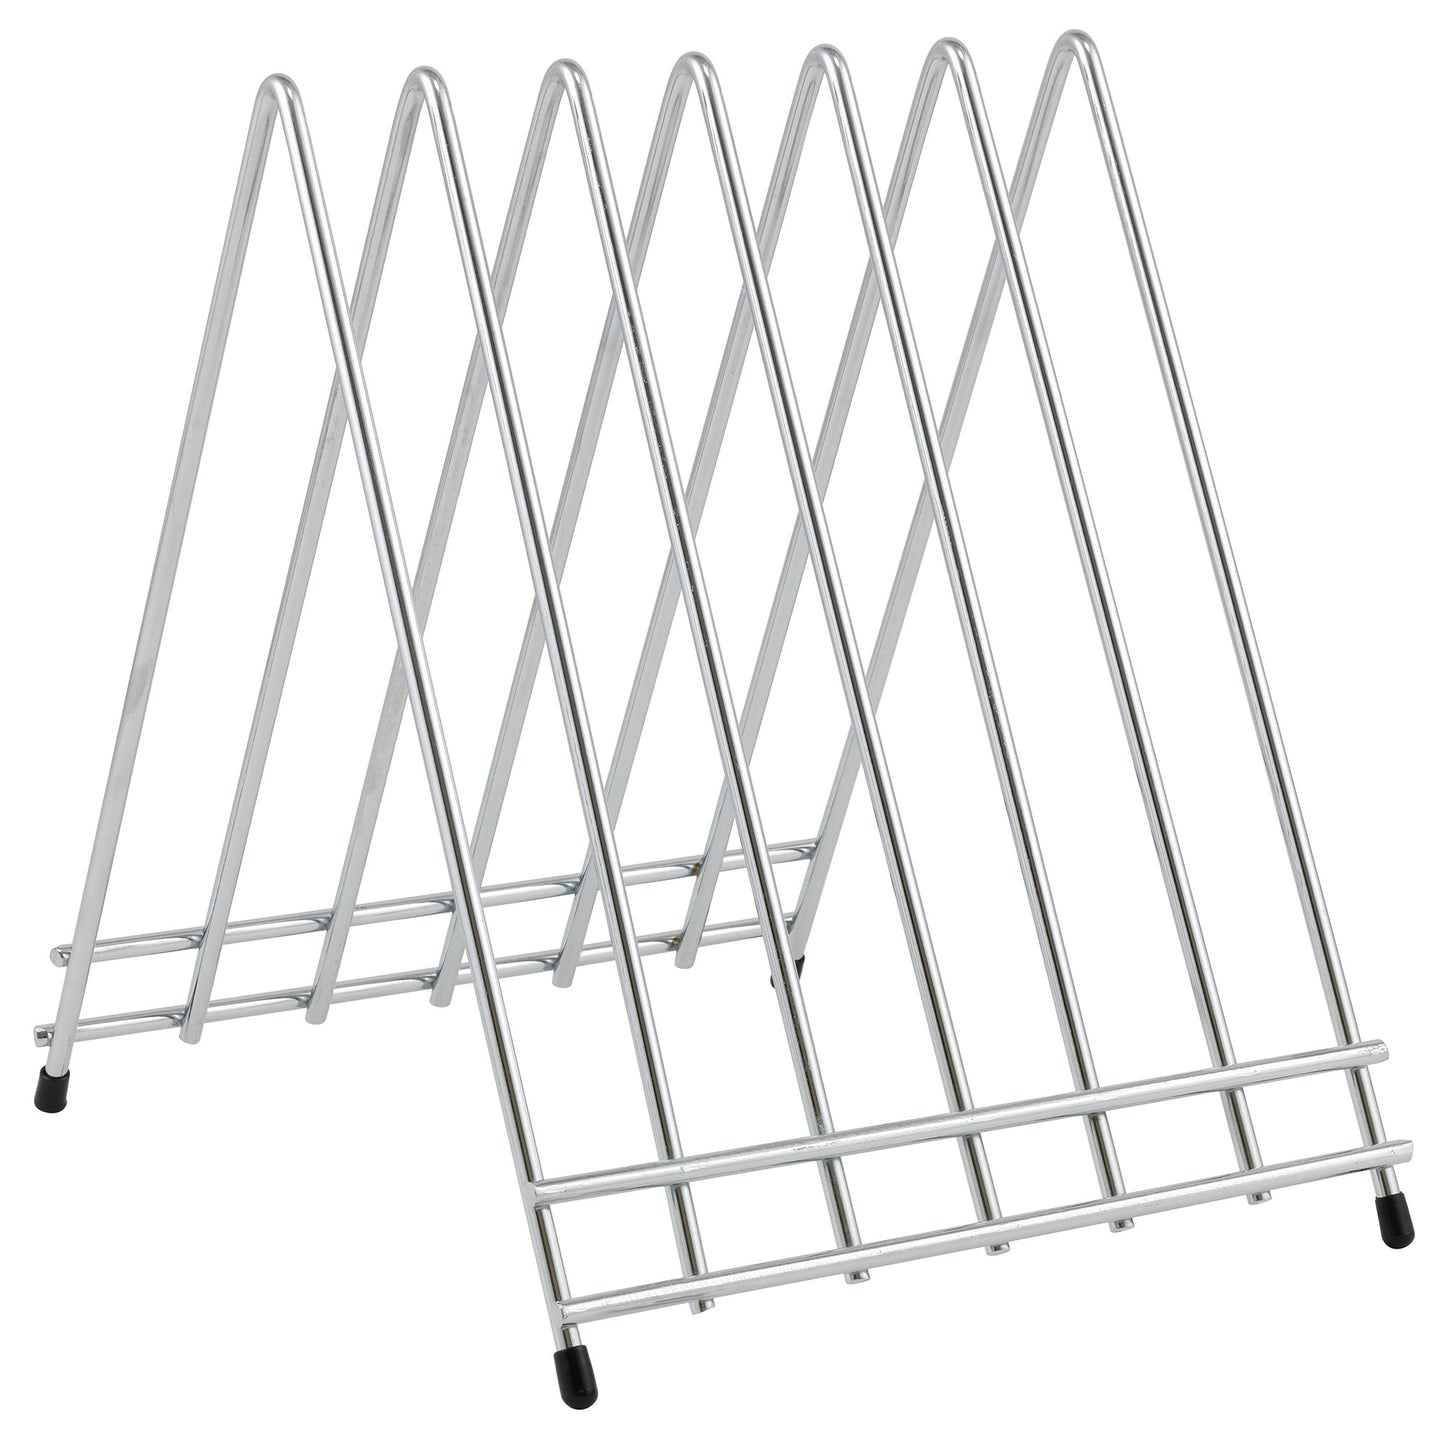 CB-6L - Cutting Board Rack with 6 slots and Accessory Hooks